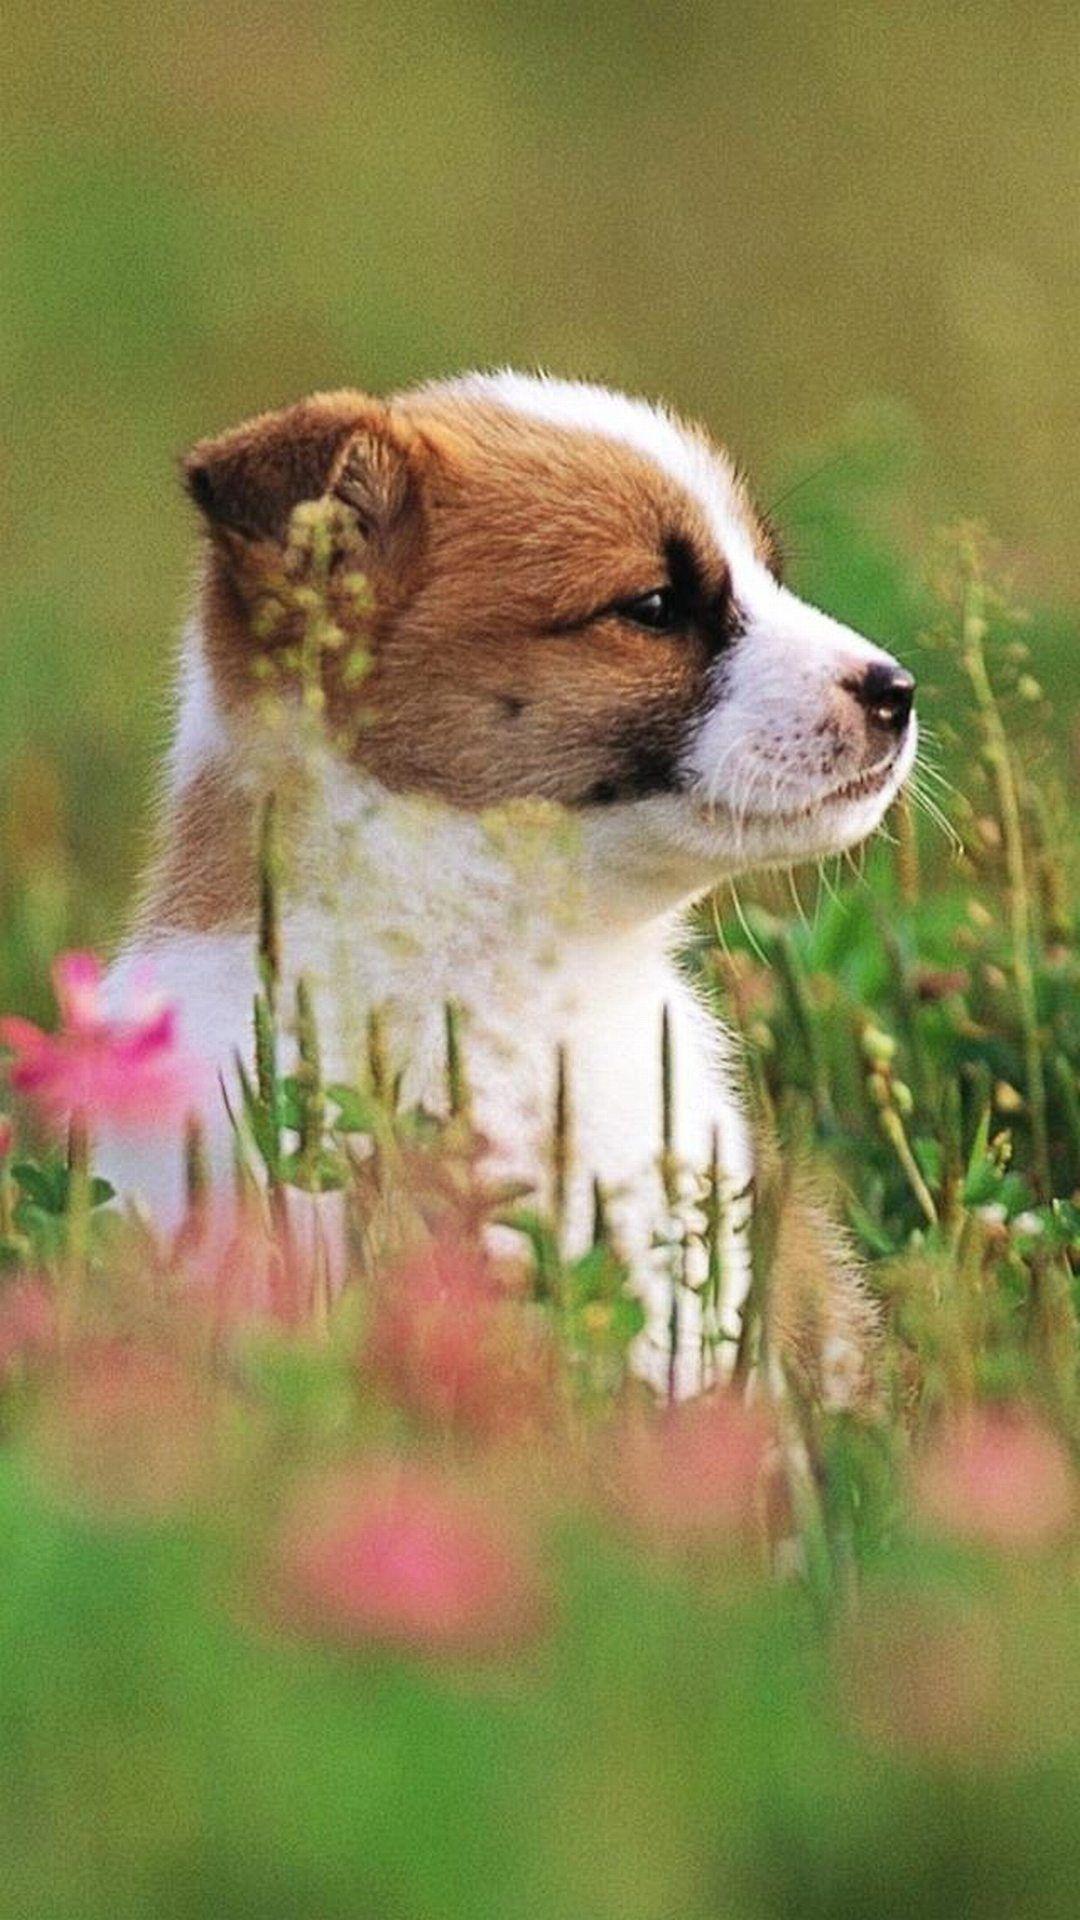 Puppy. Cute Puppies Wallpaper for iPhone. Animals Dog Phone